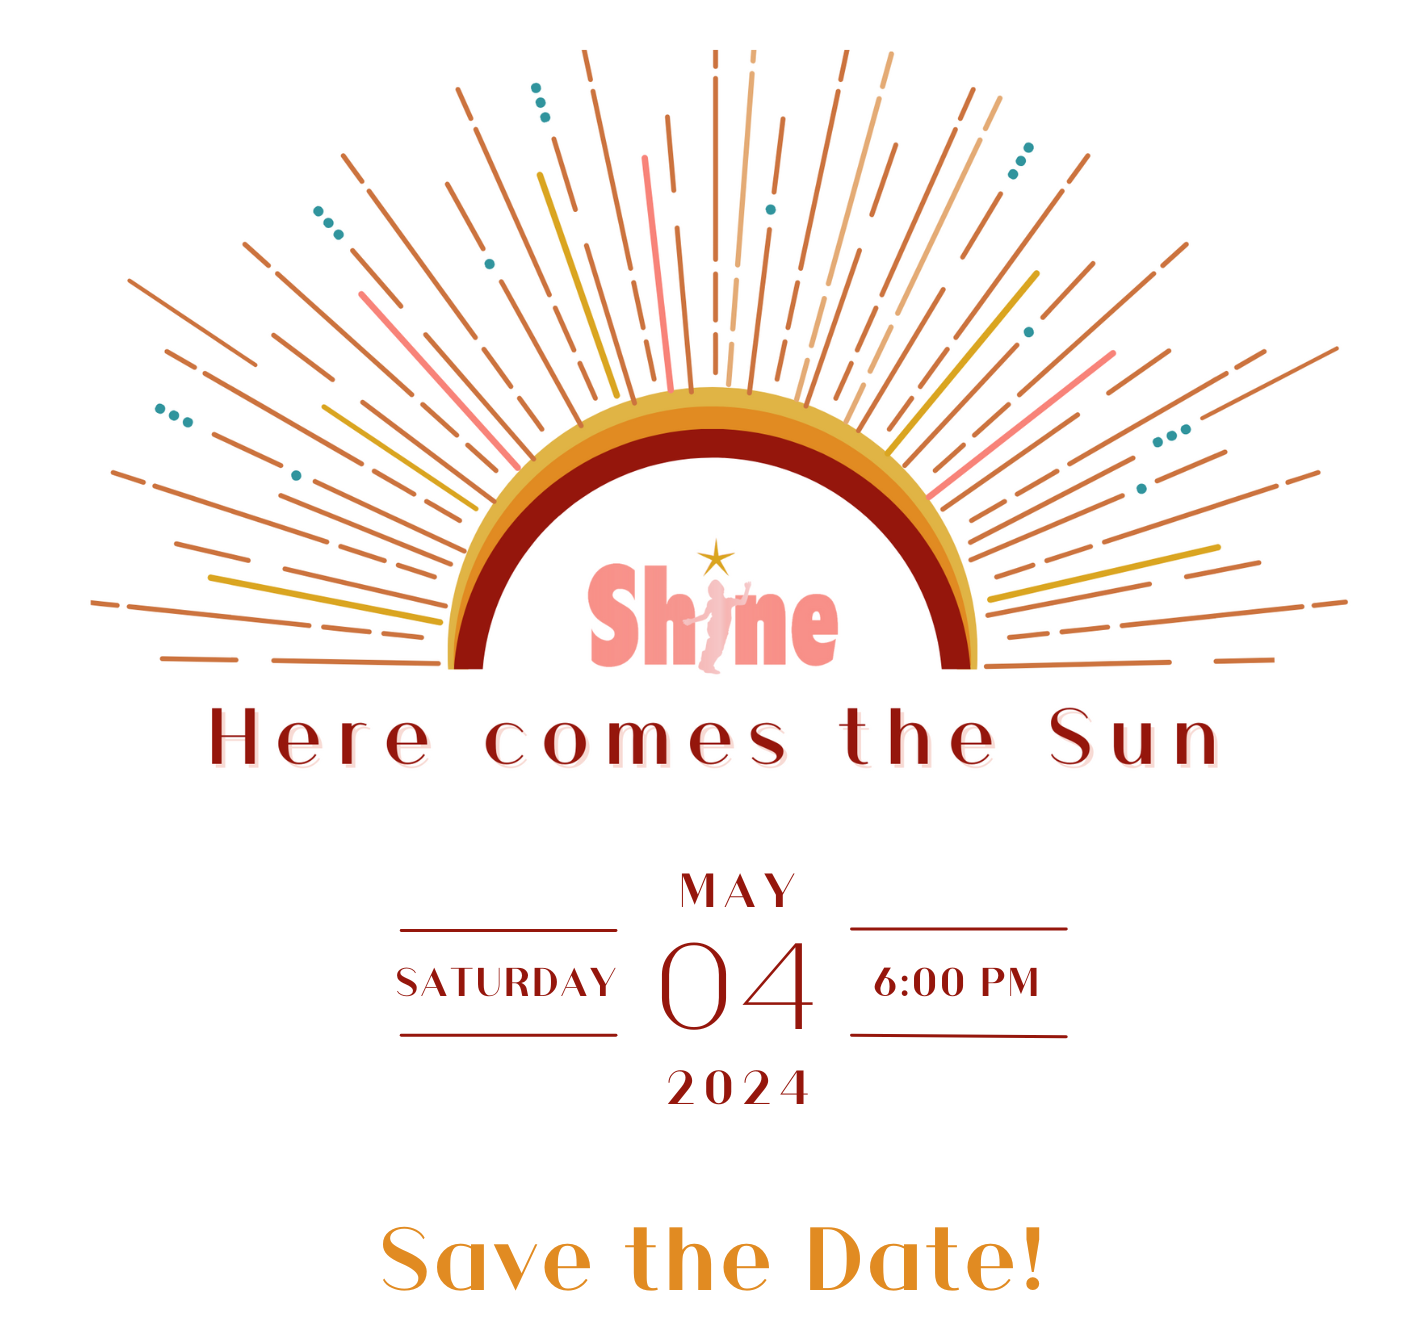 Our Lady of Lourdes Catholic School Here comes the Sun save the date